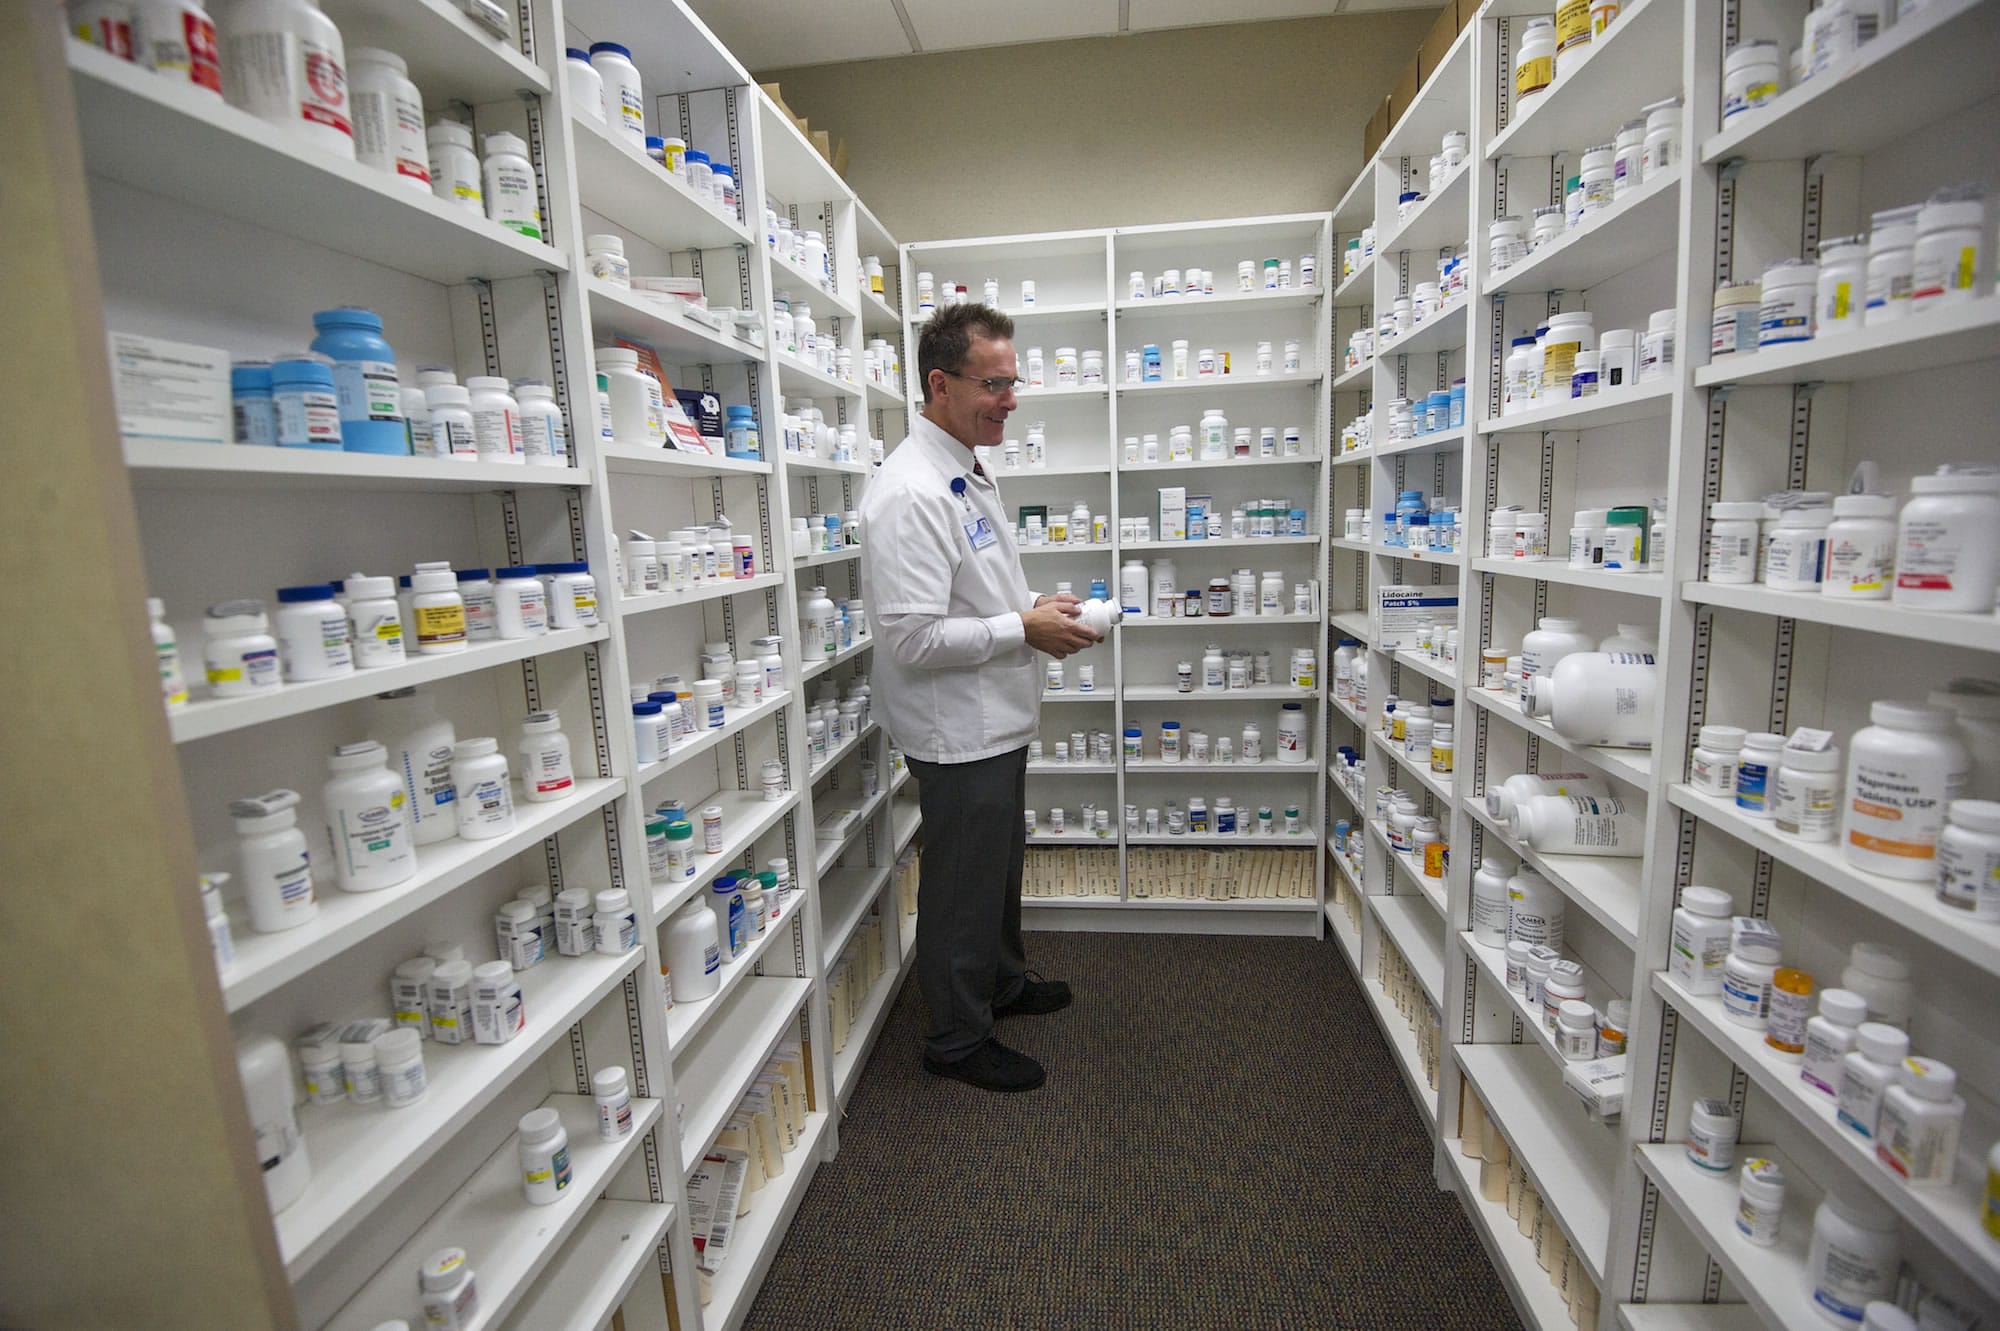 The Vancouver Clinic will hand over pharmacy operations to Fred Meyer this month -- a move that will result in pharmacy closures at two of its clinic locations and layoffs for about a dozen employees.